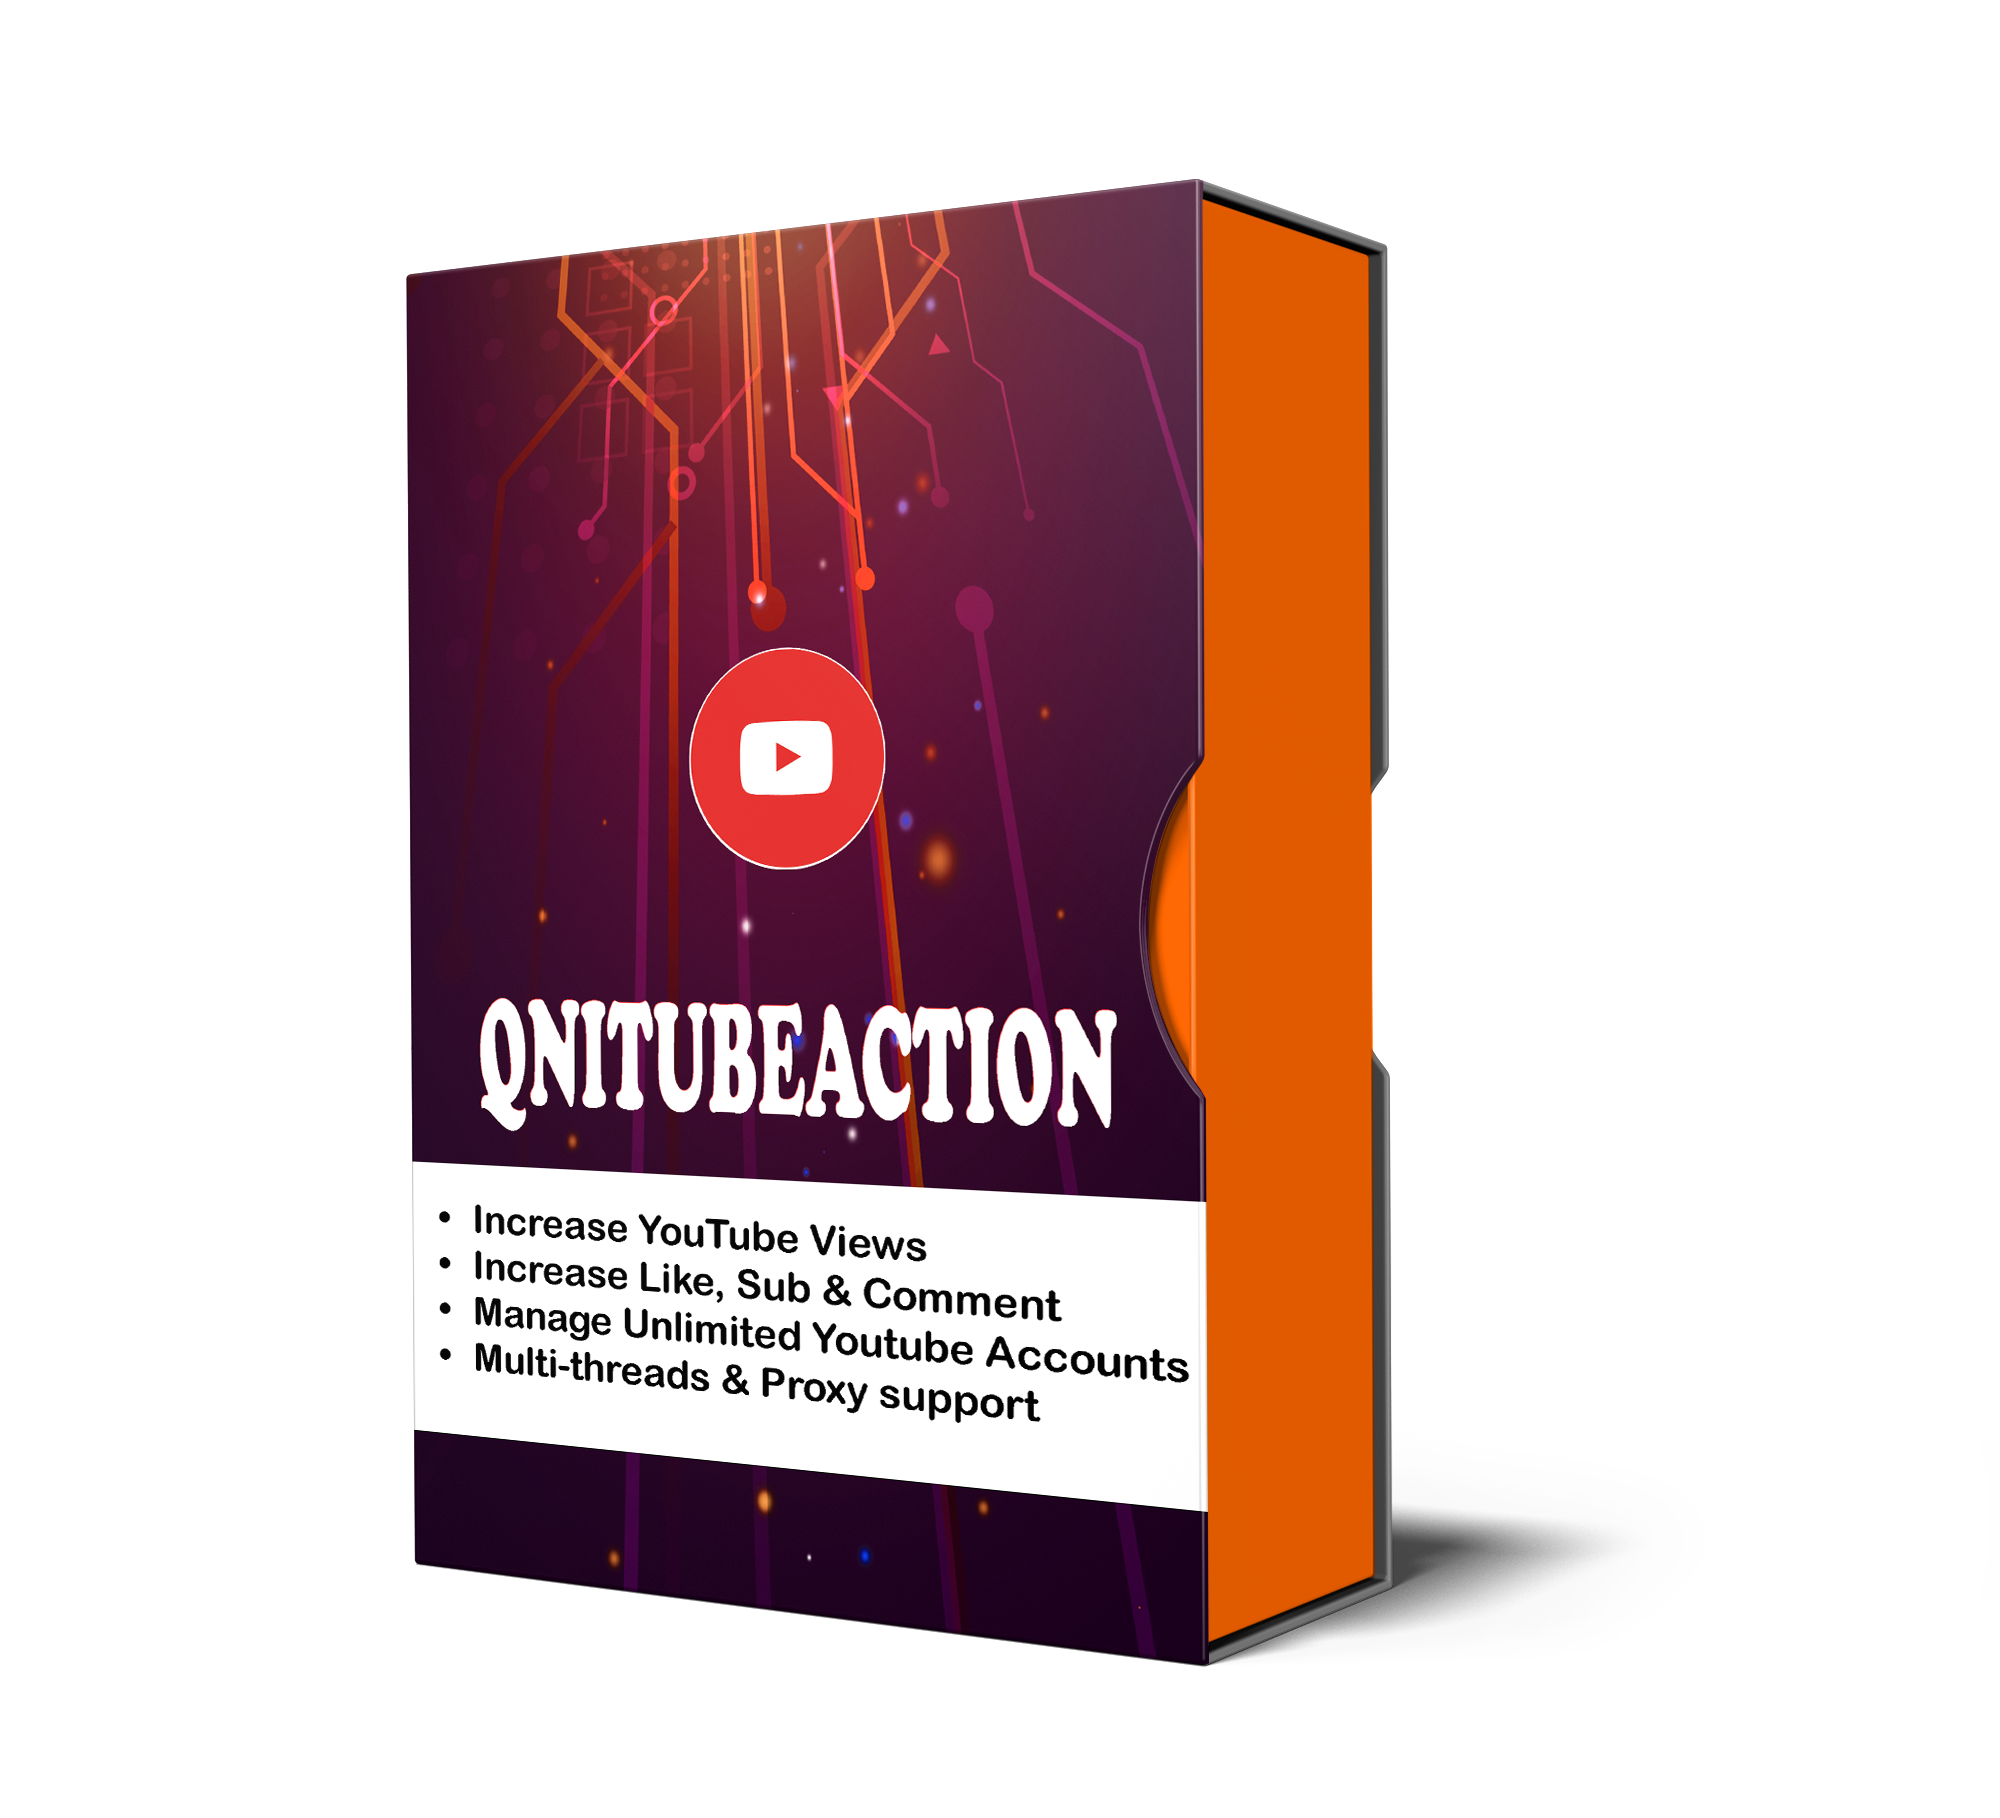 Youtube watch time software – Increase YouTube watch time using QniTubeAction